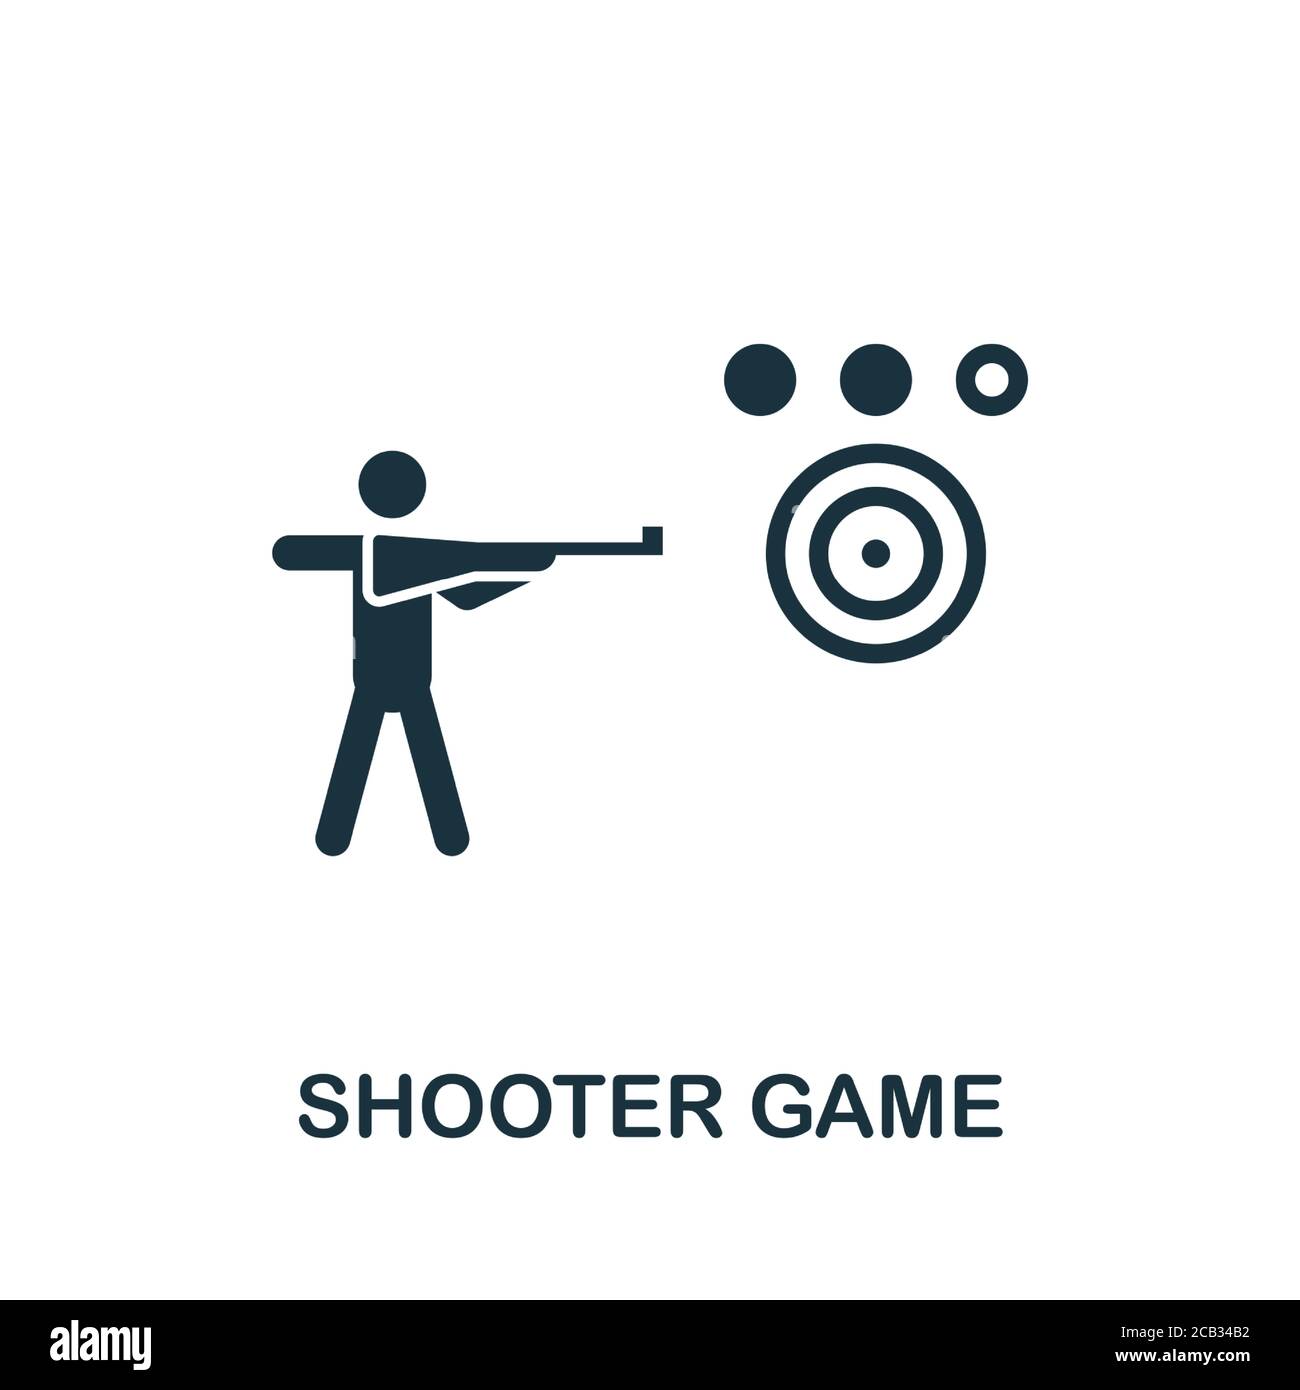 Shooter Game icon